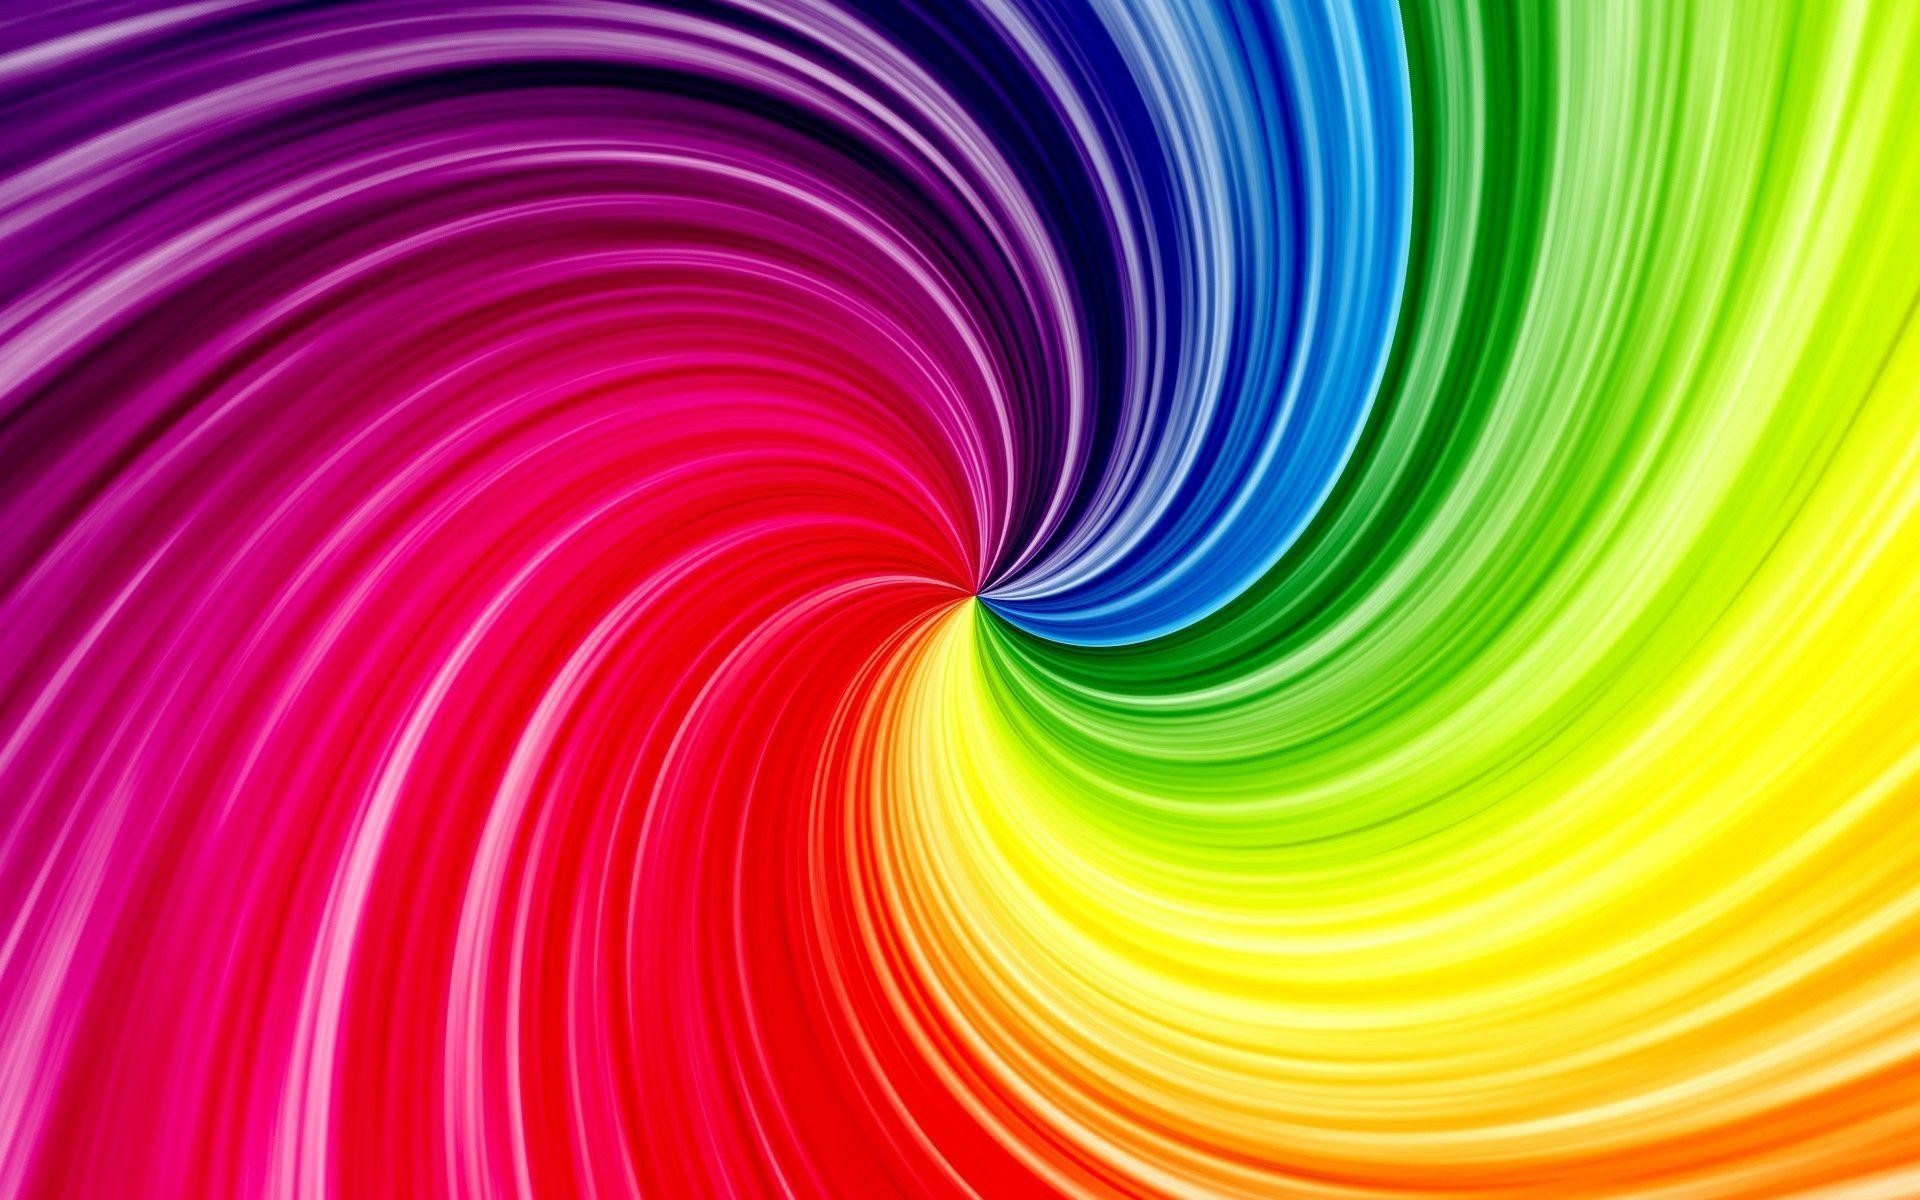 1920x1200  Bright Colorful Waves 308156 Images HD Wallpapers| Wallfoy. 0 Â·  Download Â· Res: 2560x1600, Bright Colors Wallpaper